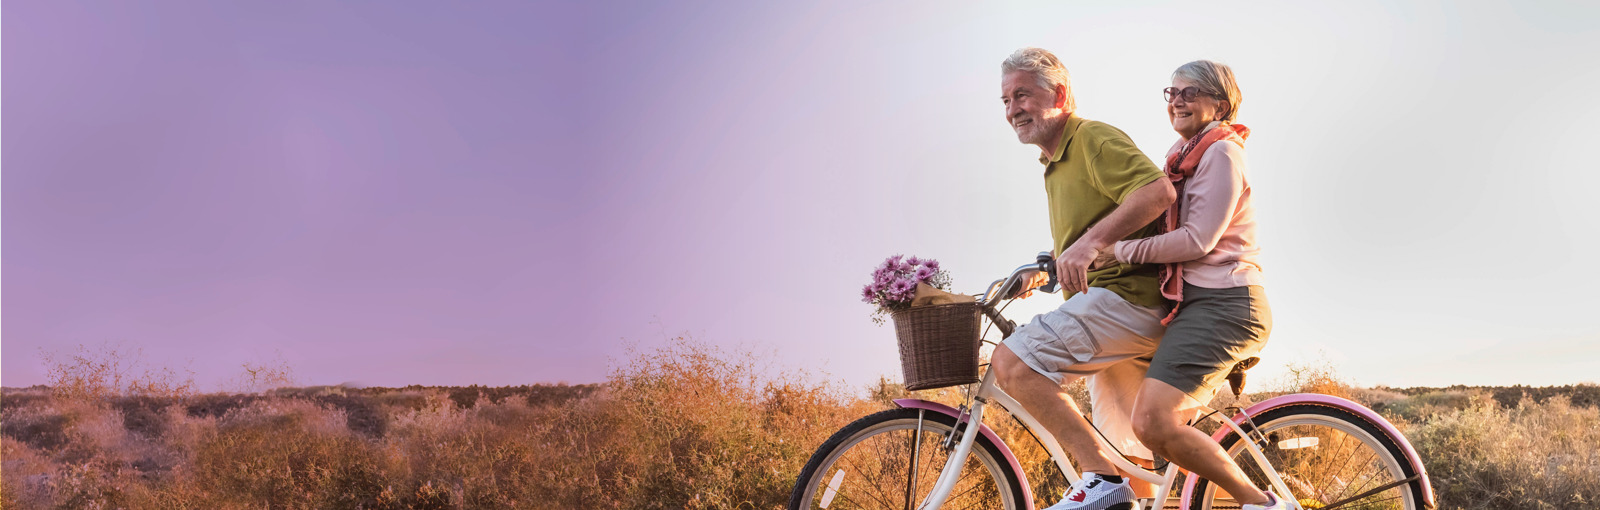 elderly couple riding on tandem bicycle